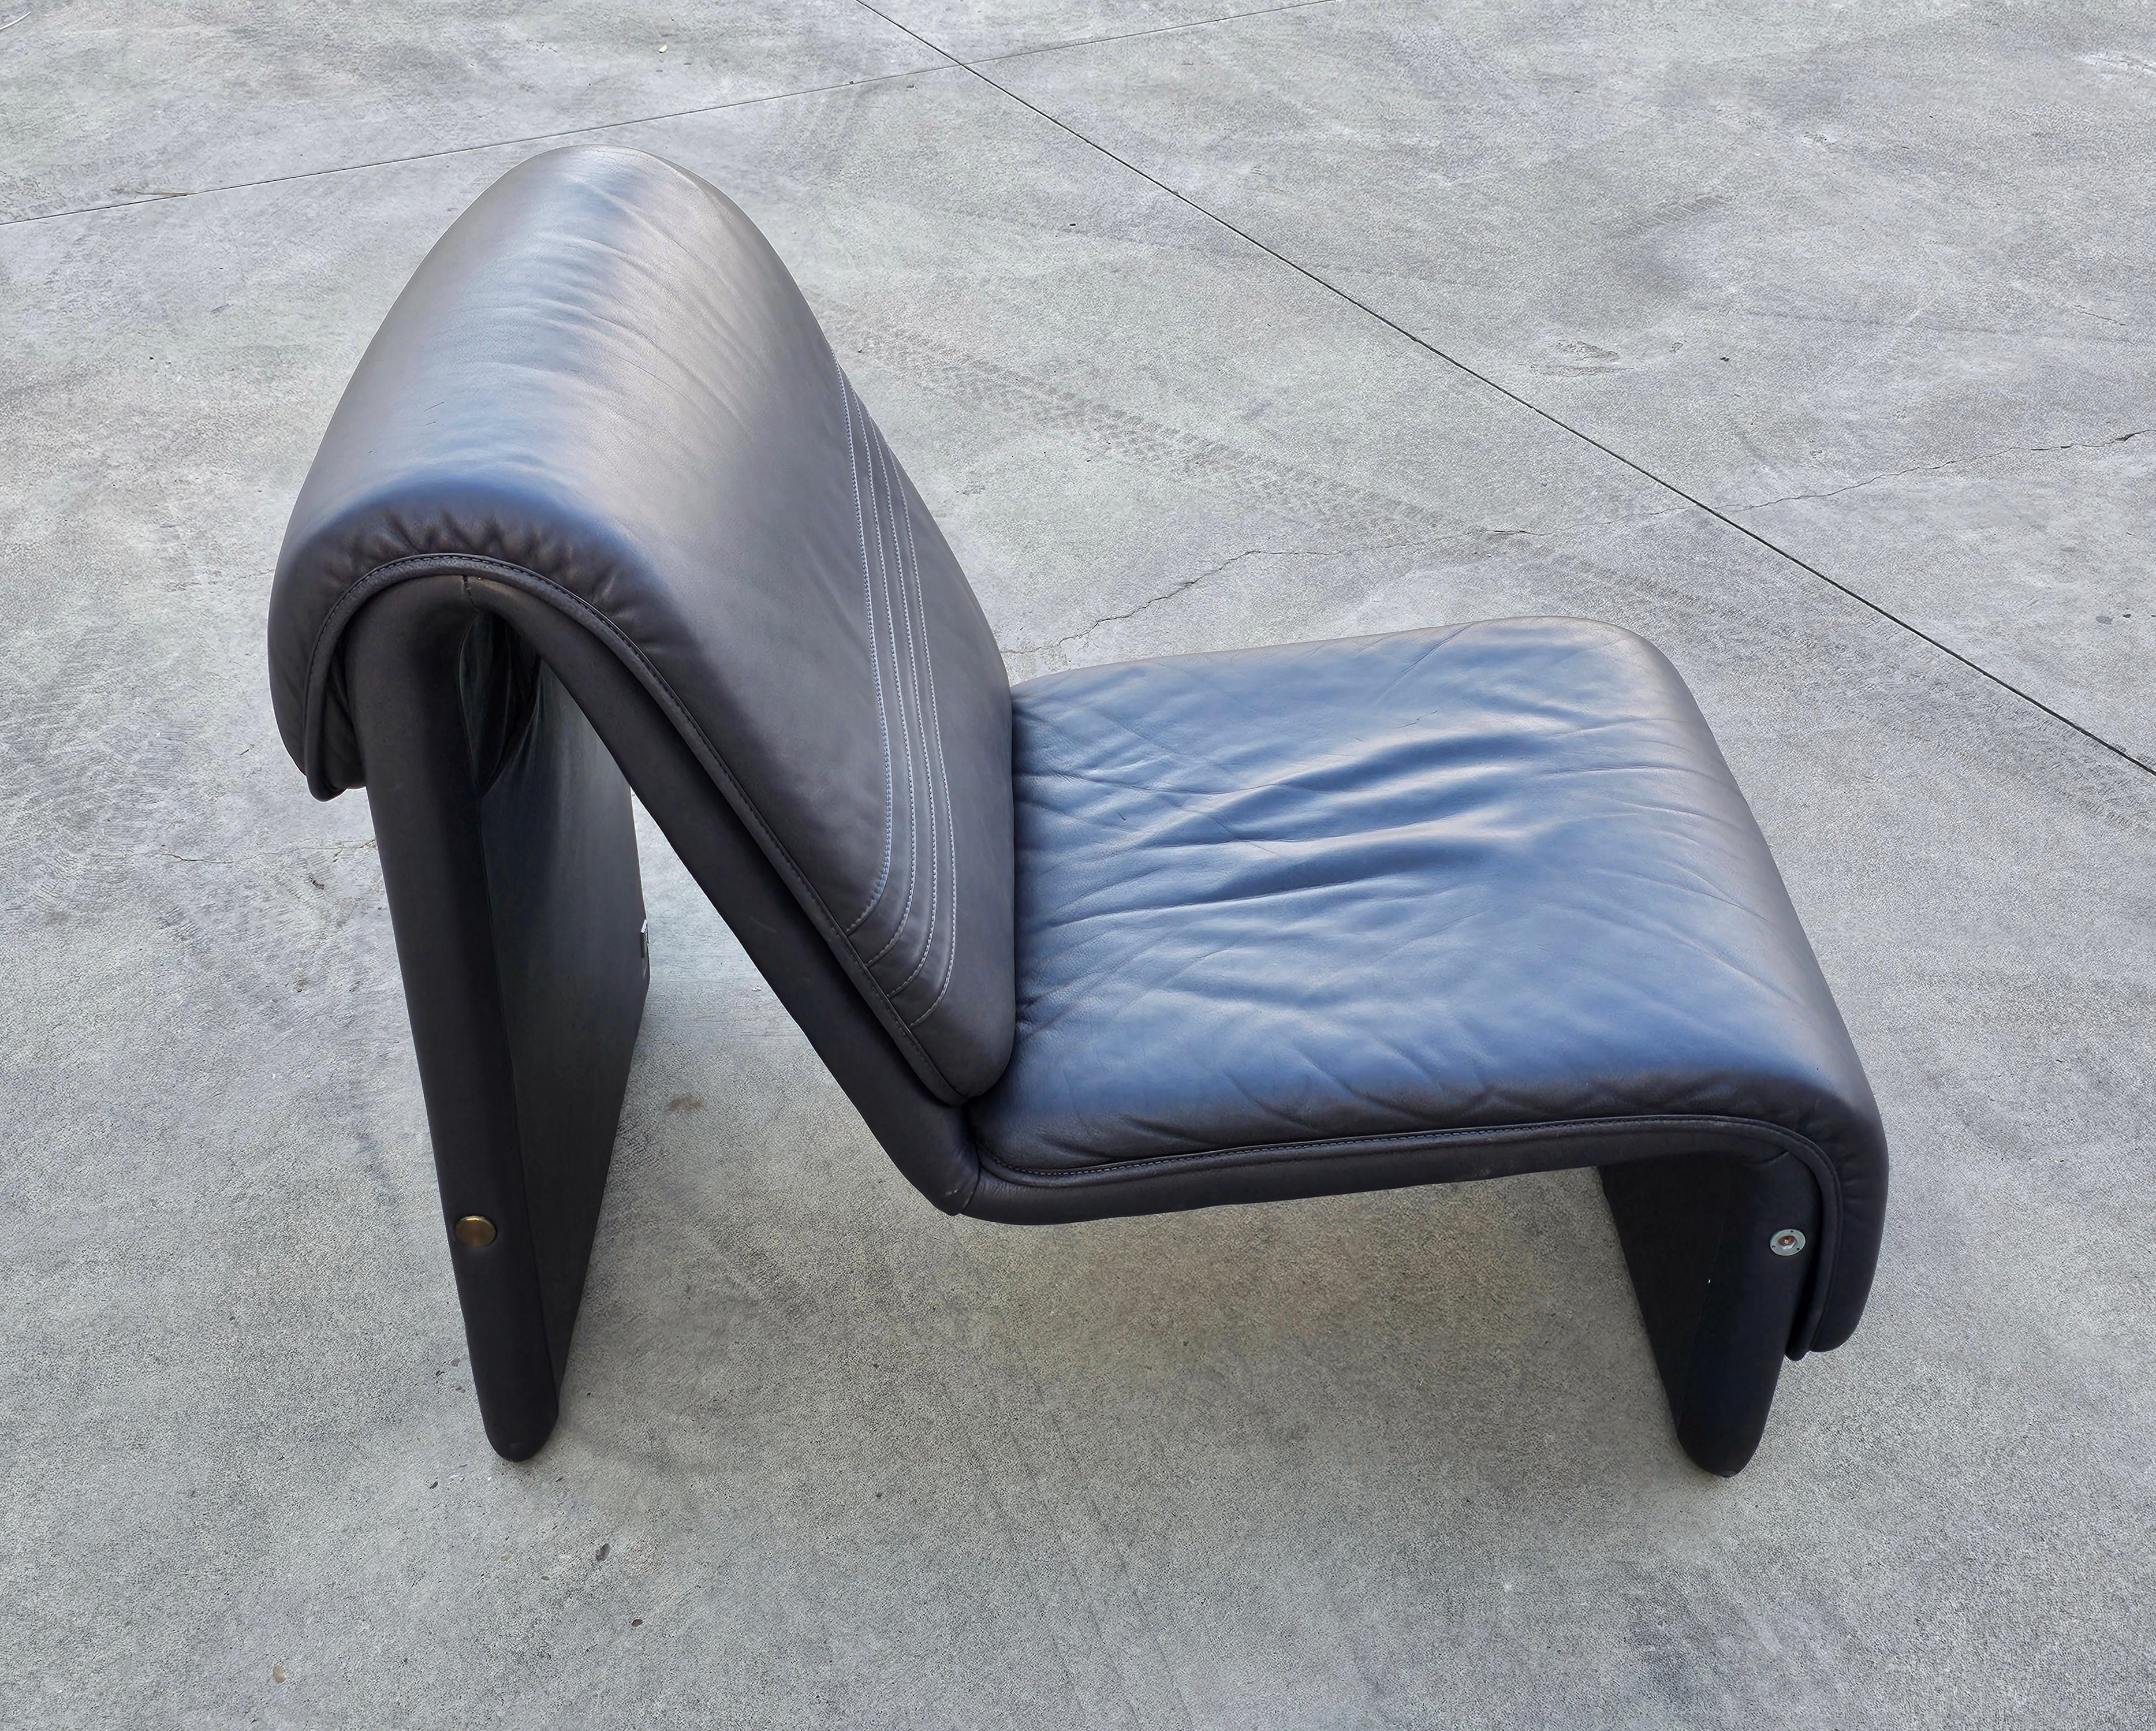 Postmodern Leather Lounge Chairs in style of Etienne Fermigier, Switzerland 1978 For Sale 1